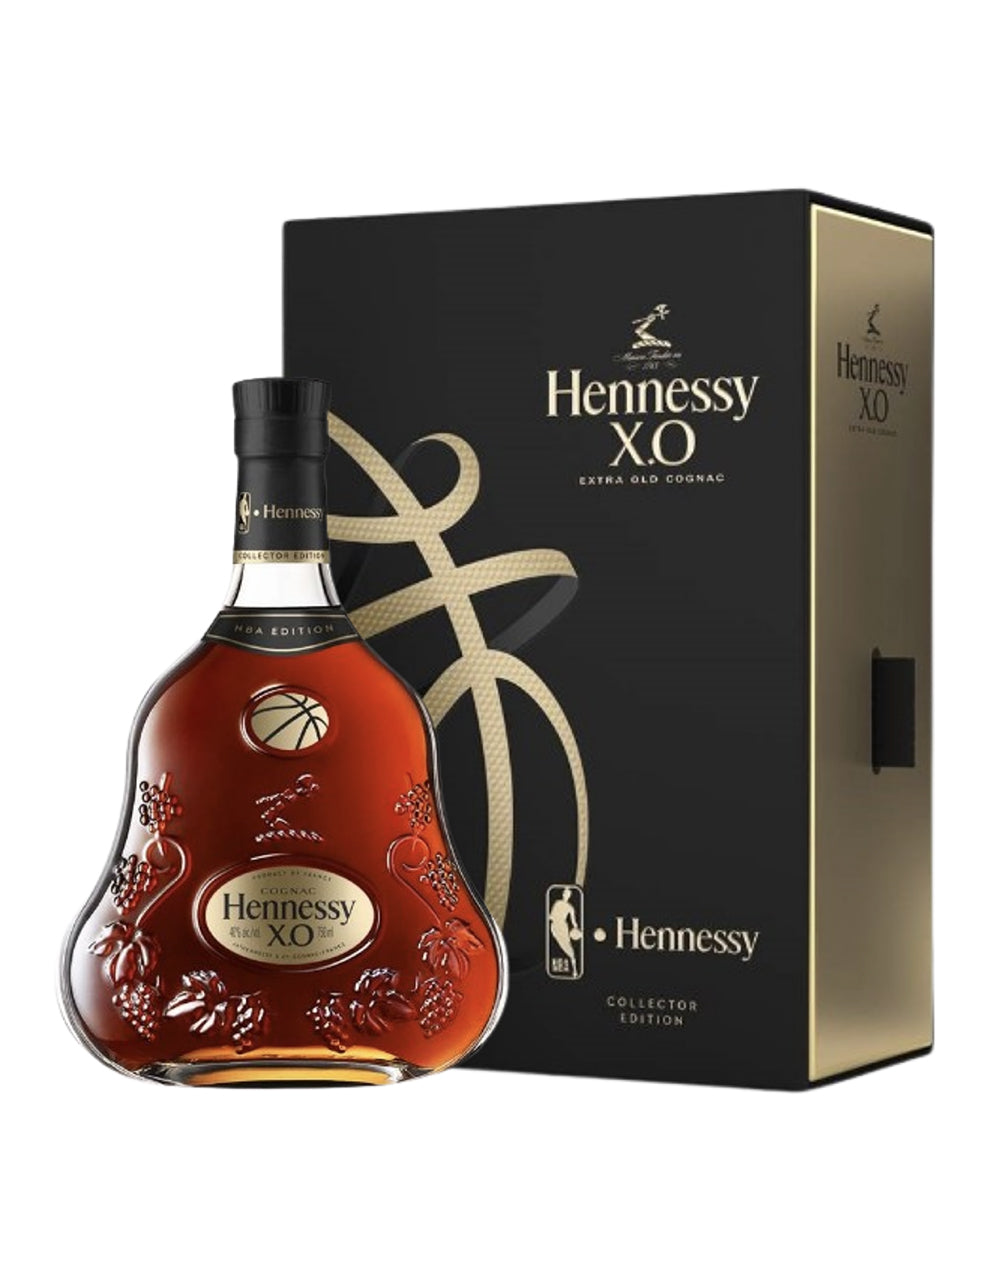 Hennessy+NBA +Collaboration+EMPTY+BOX+ONLY+Fits+750+mL+Bottle+-+Spirit+Of+The+NBA for  sale online